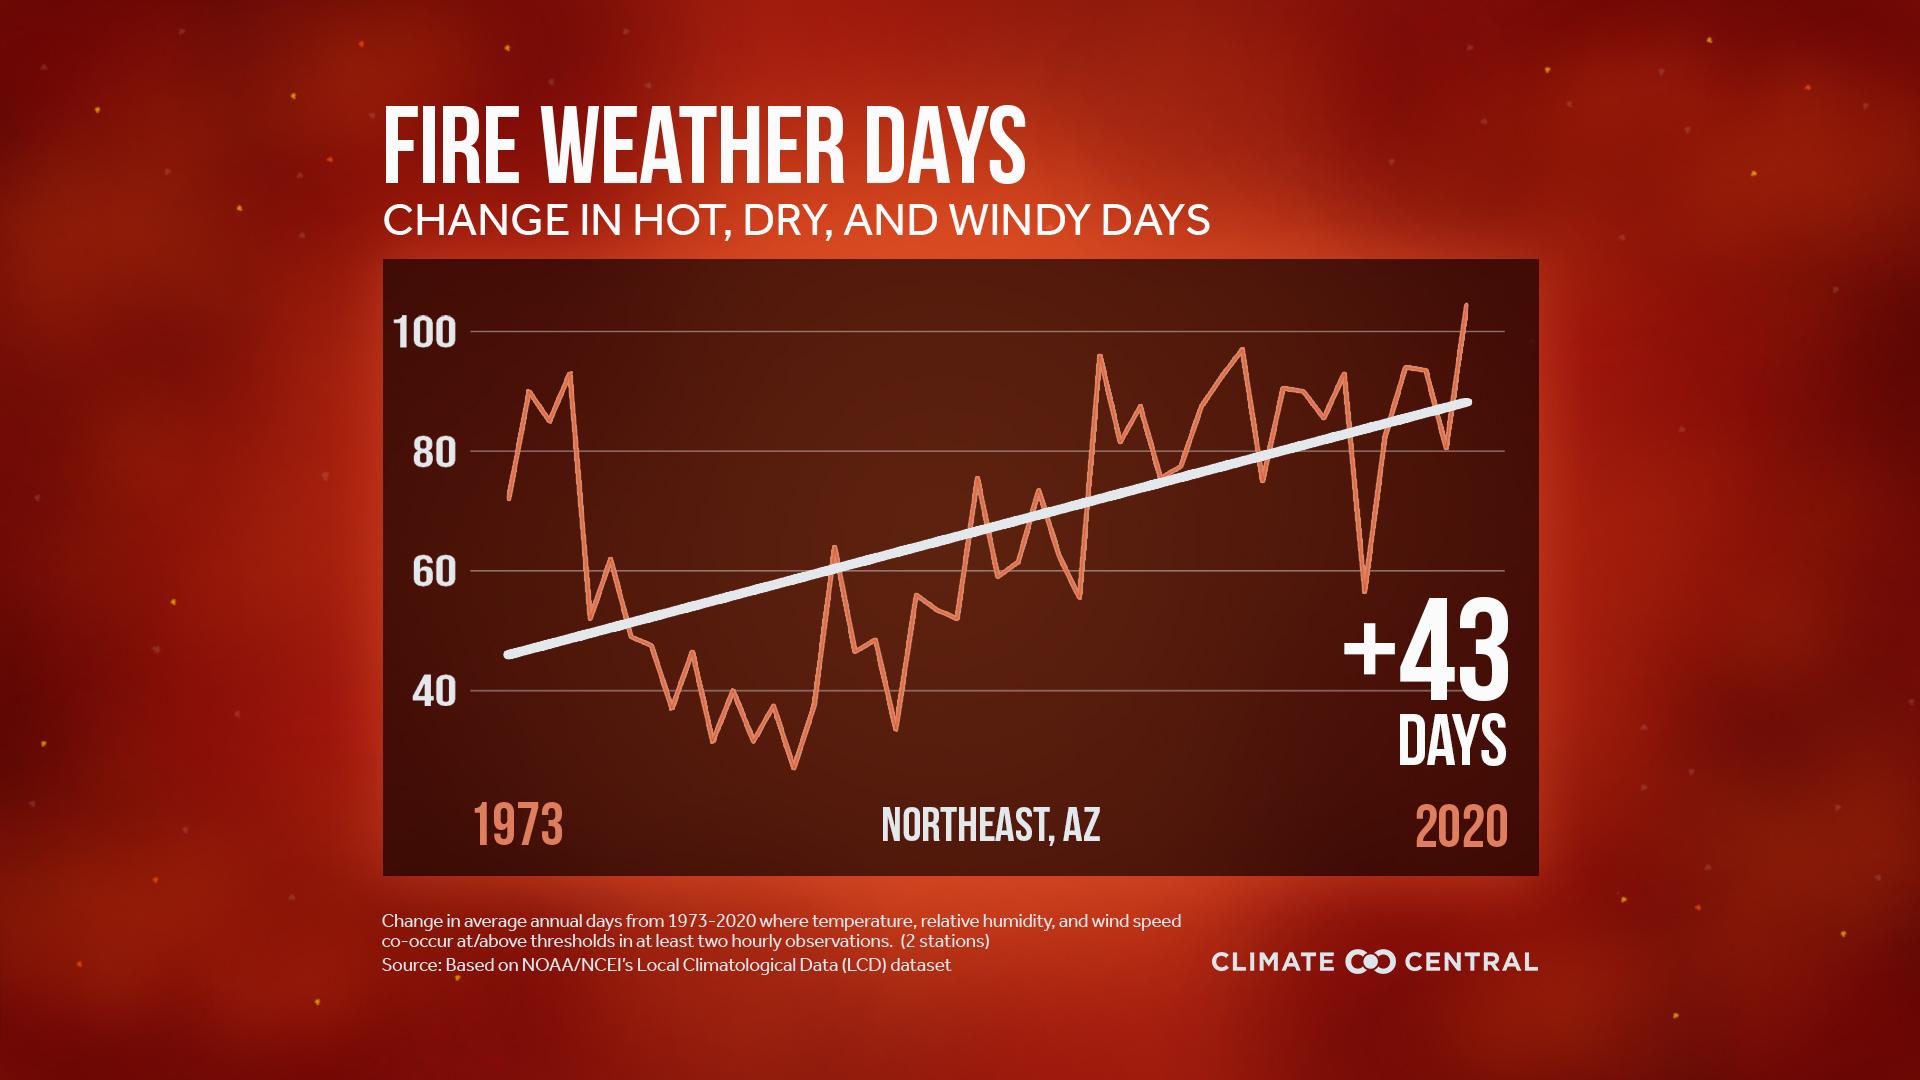 Fire Weather Days by Climate Division (not available for all locations) - Western Fire Weather Days Increasing